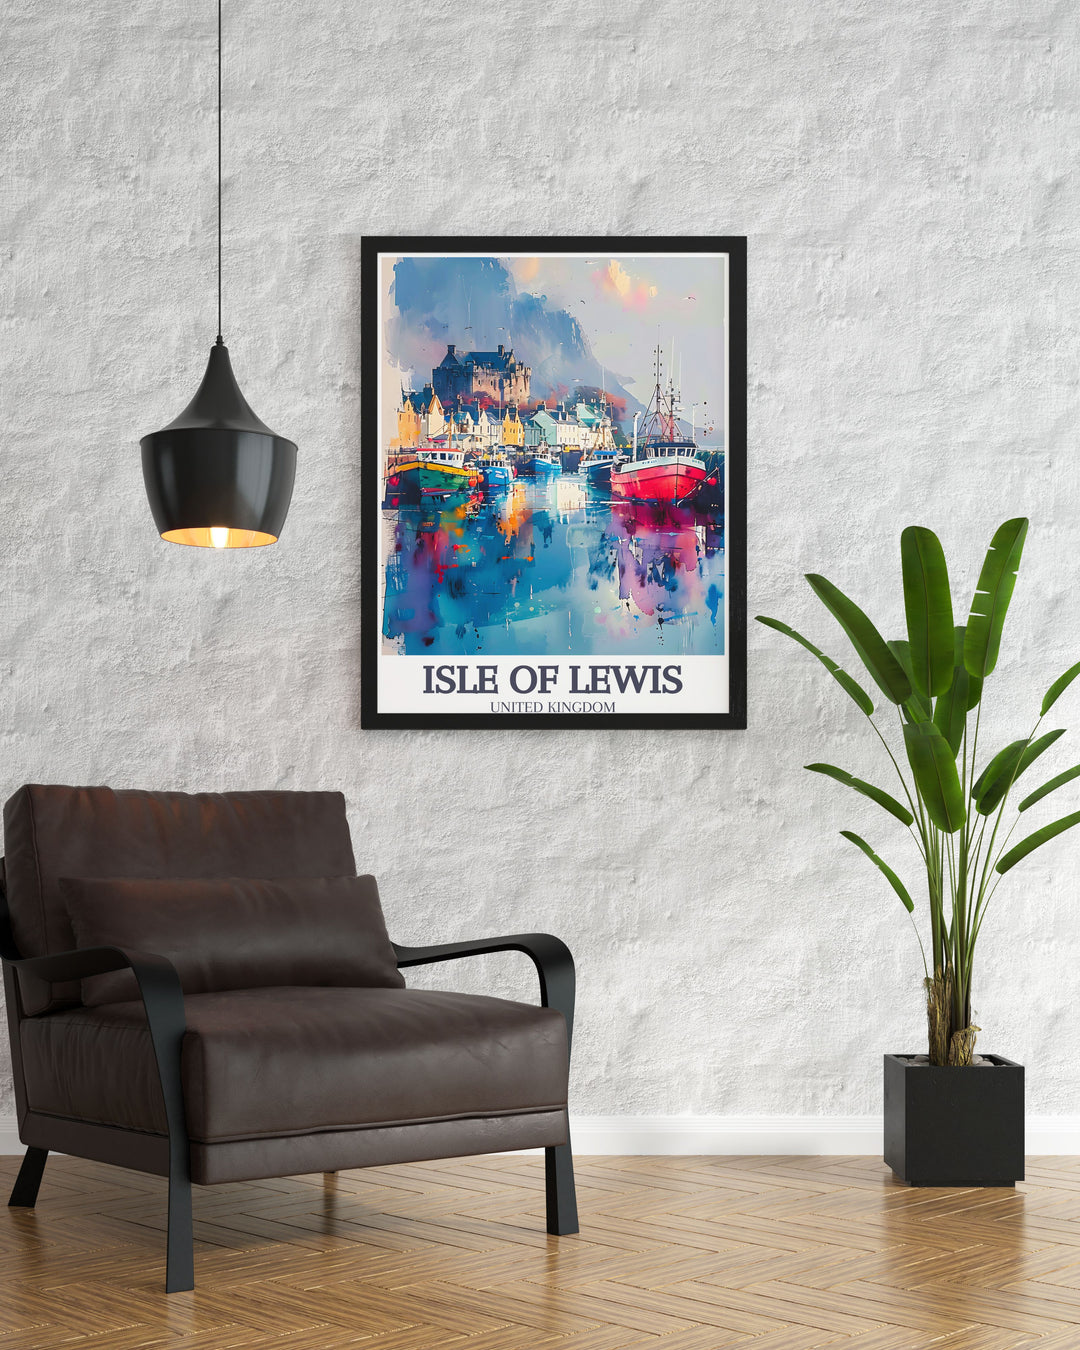 Gallery wall art of the Isle of Lewis, showcasing its natural splendor and serene landscapes, bringing a piece of Scotlands wilderness into your living space.